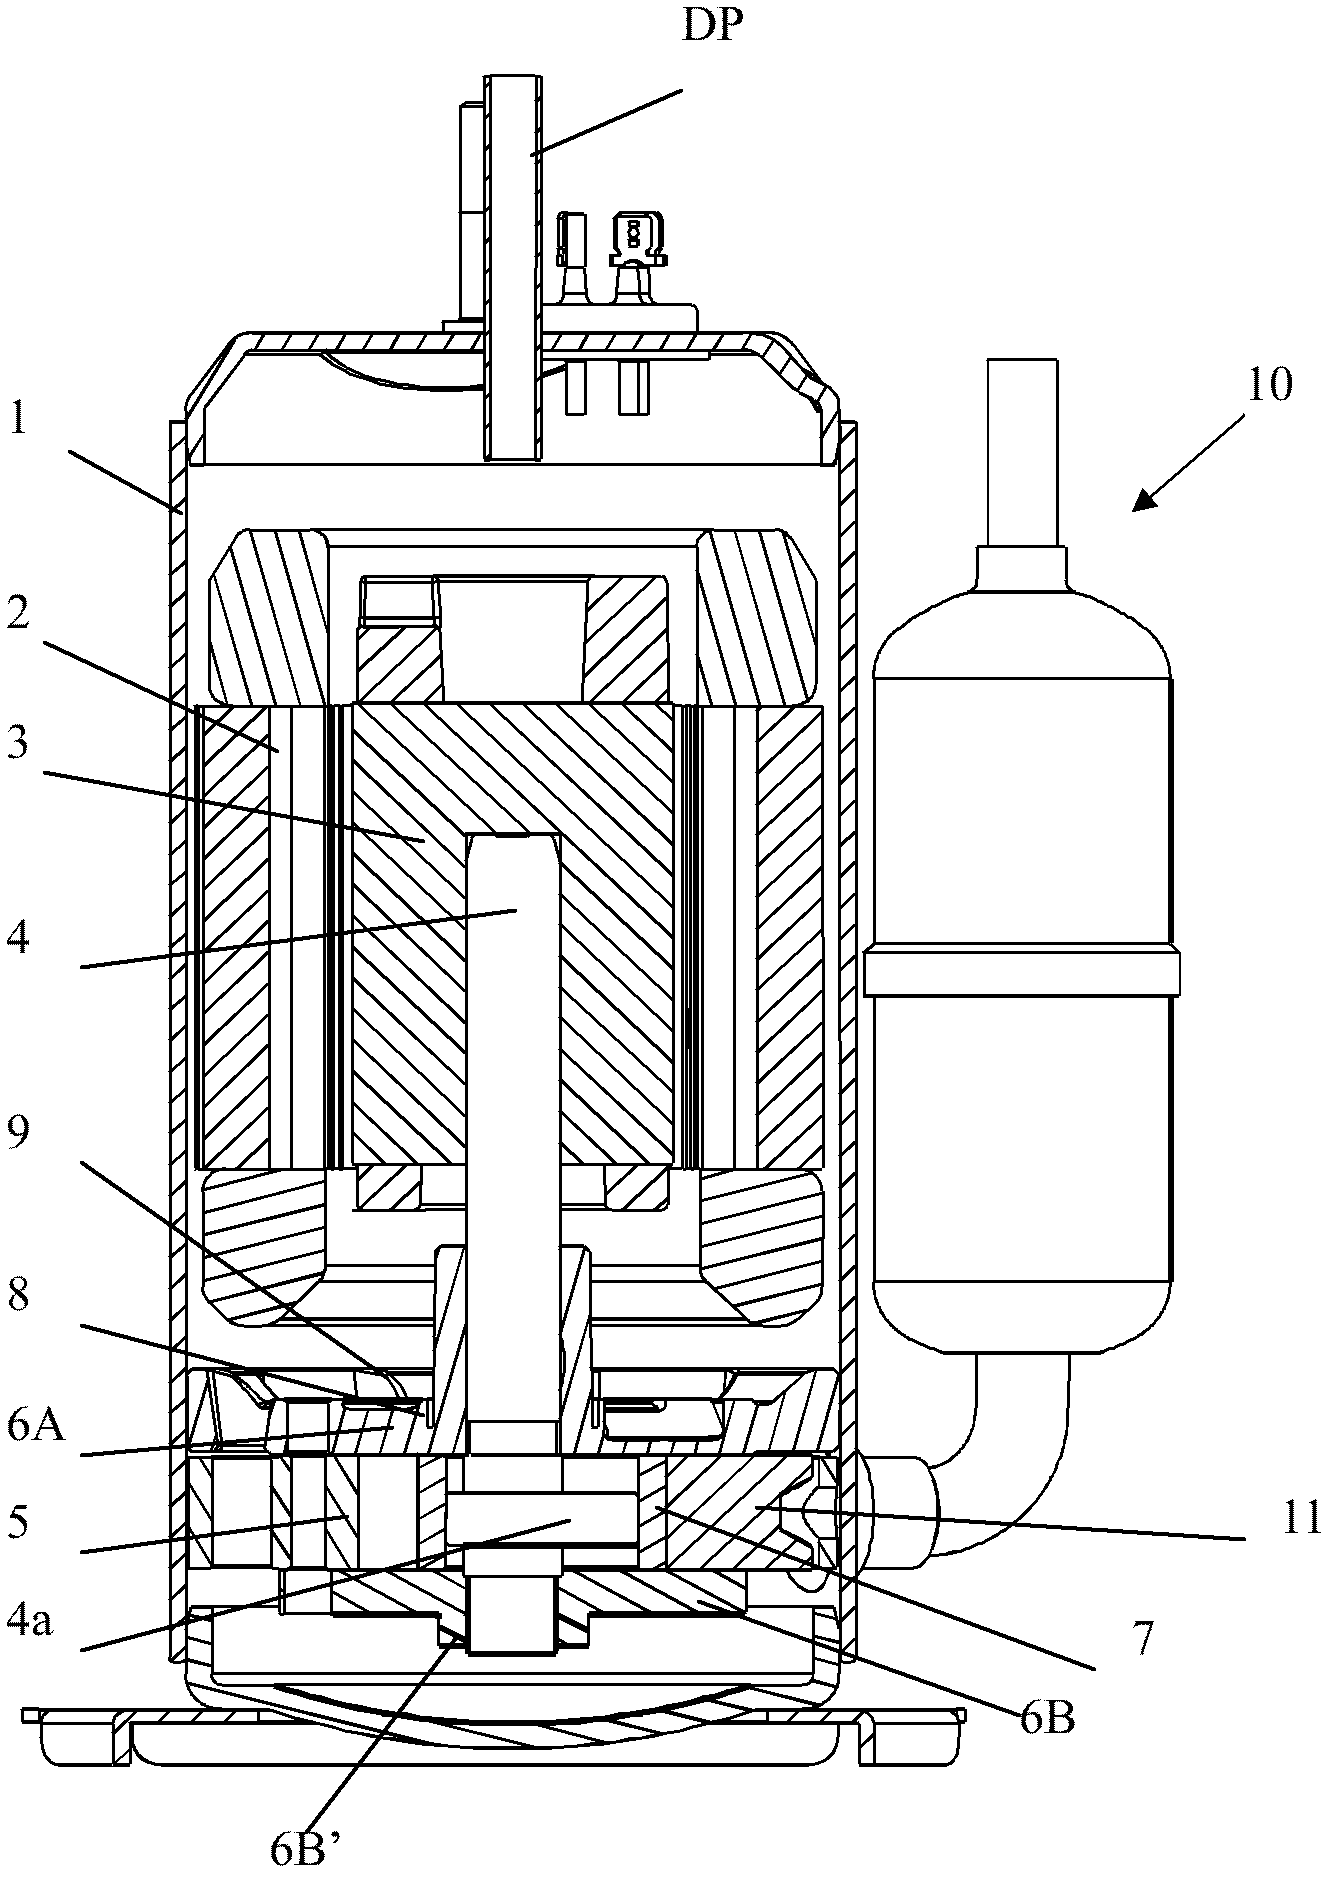 Suction opening structure of compressor